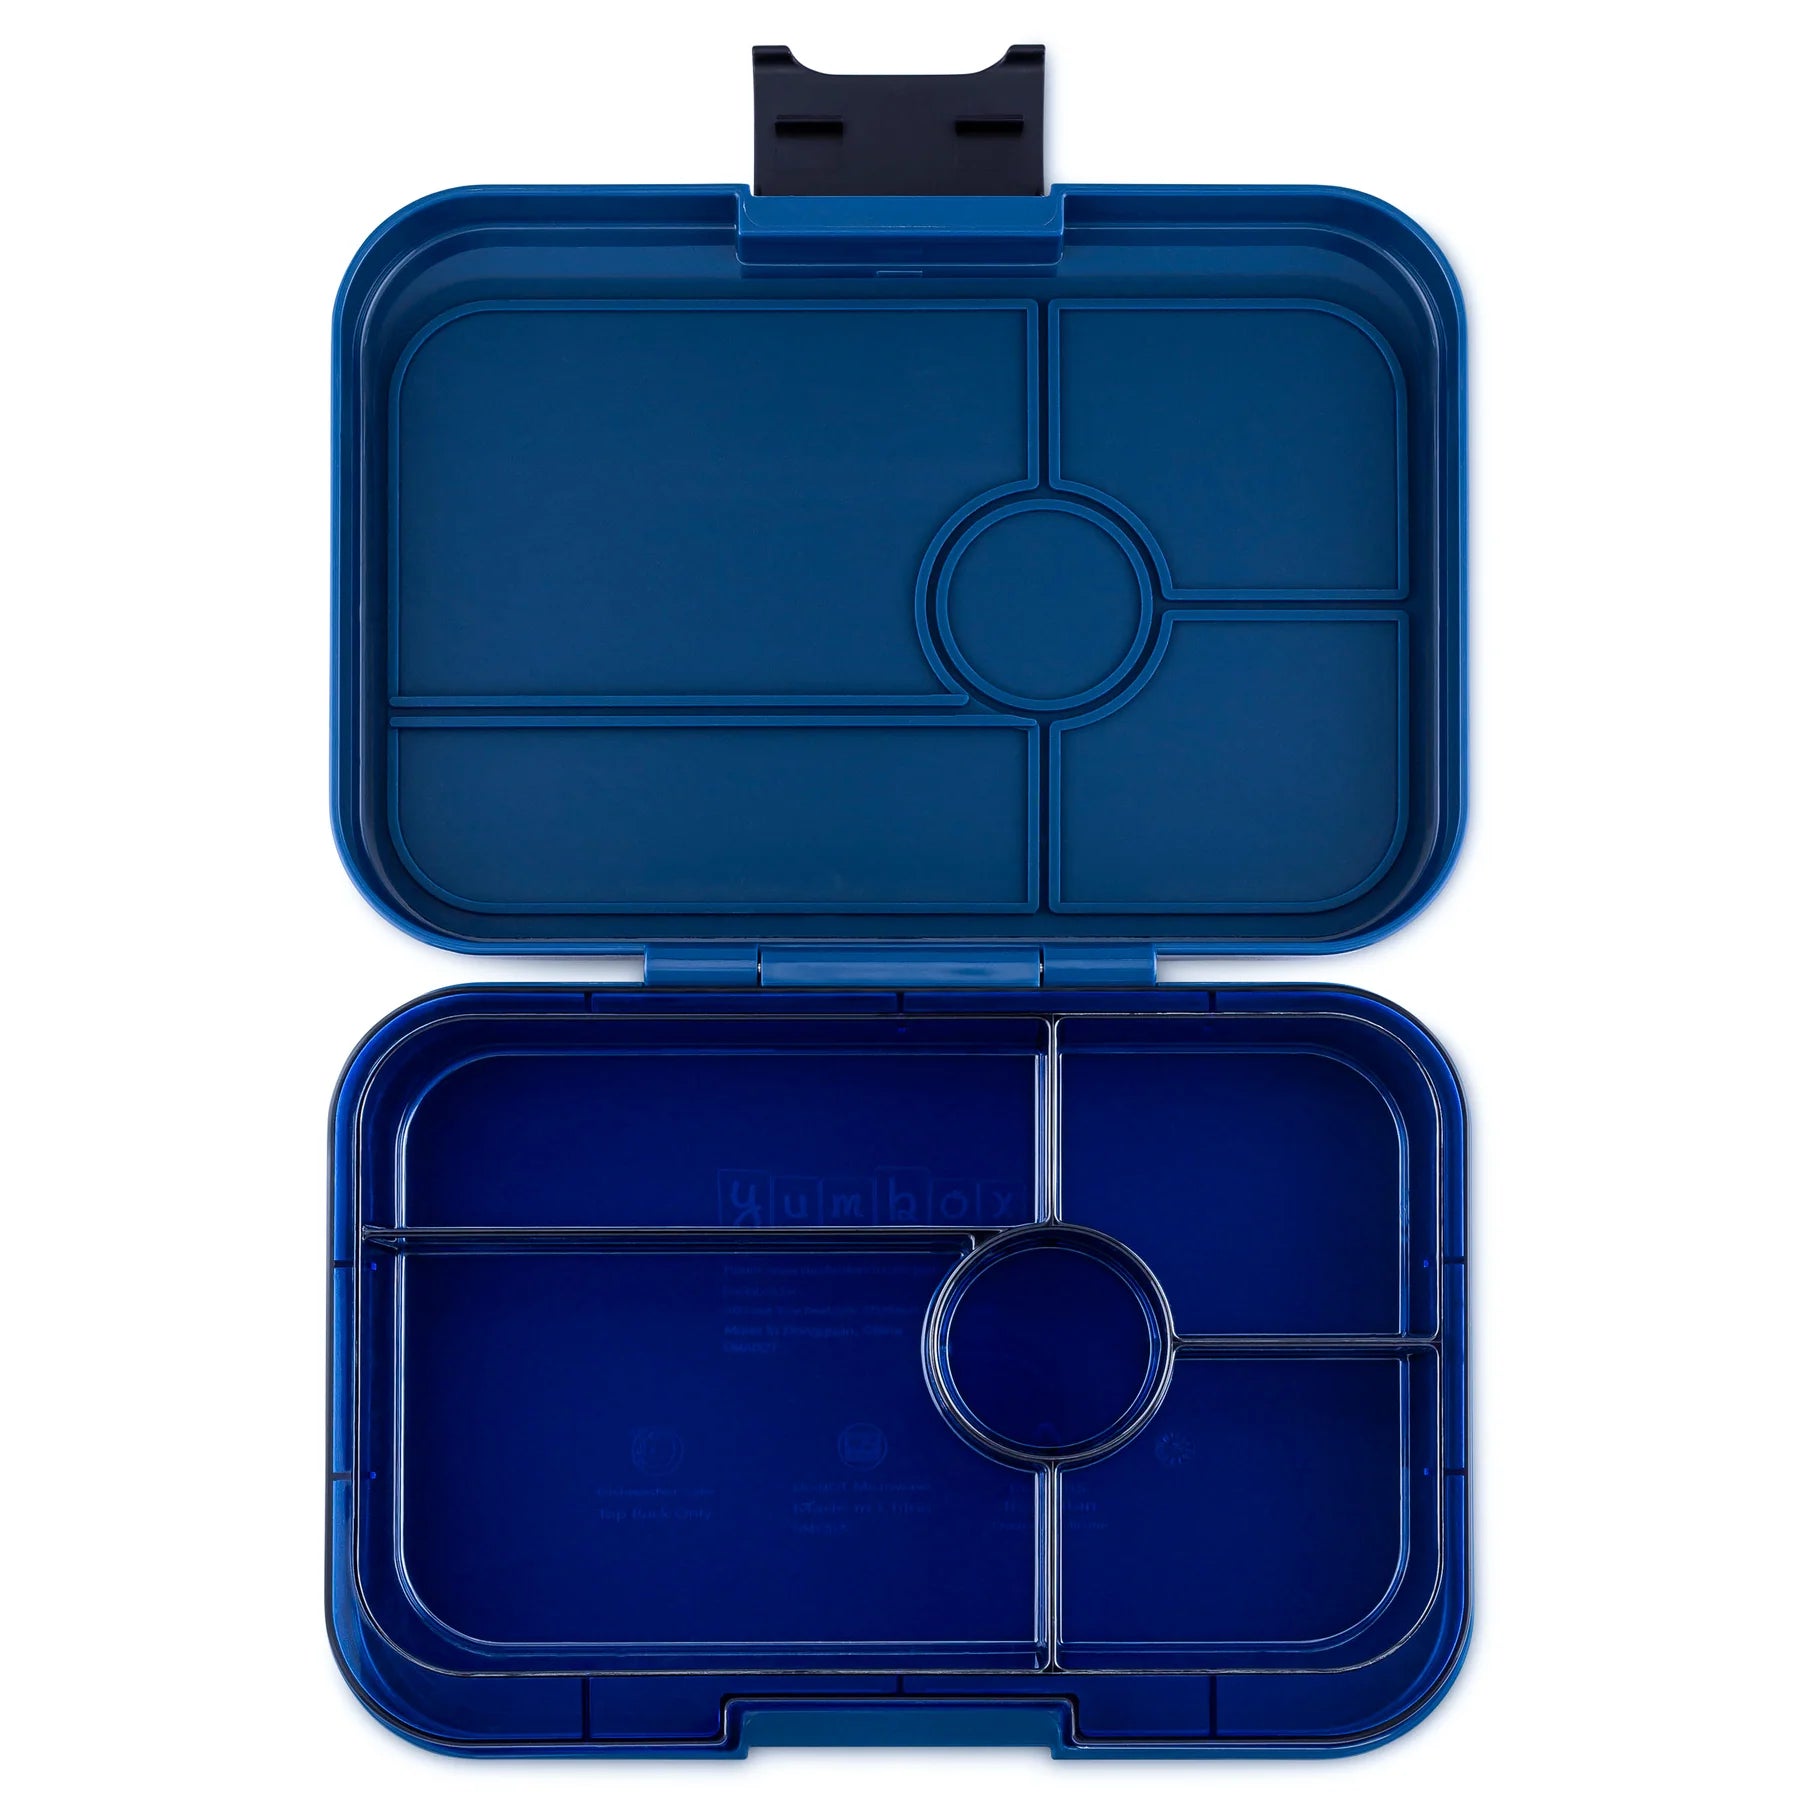 Yumbox Tapas 5-Compartment Food Tray - Monte Carlo Blue/Clear Navy